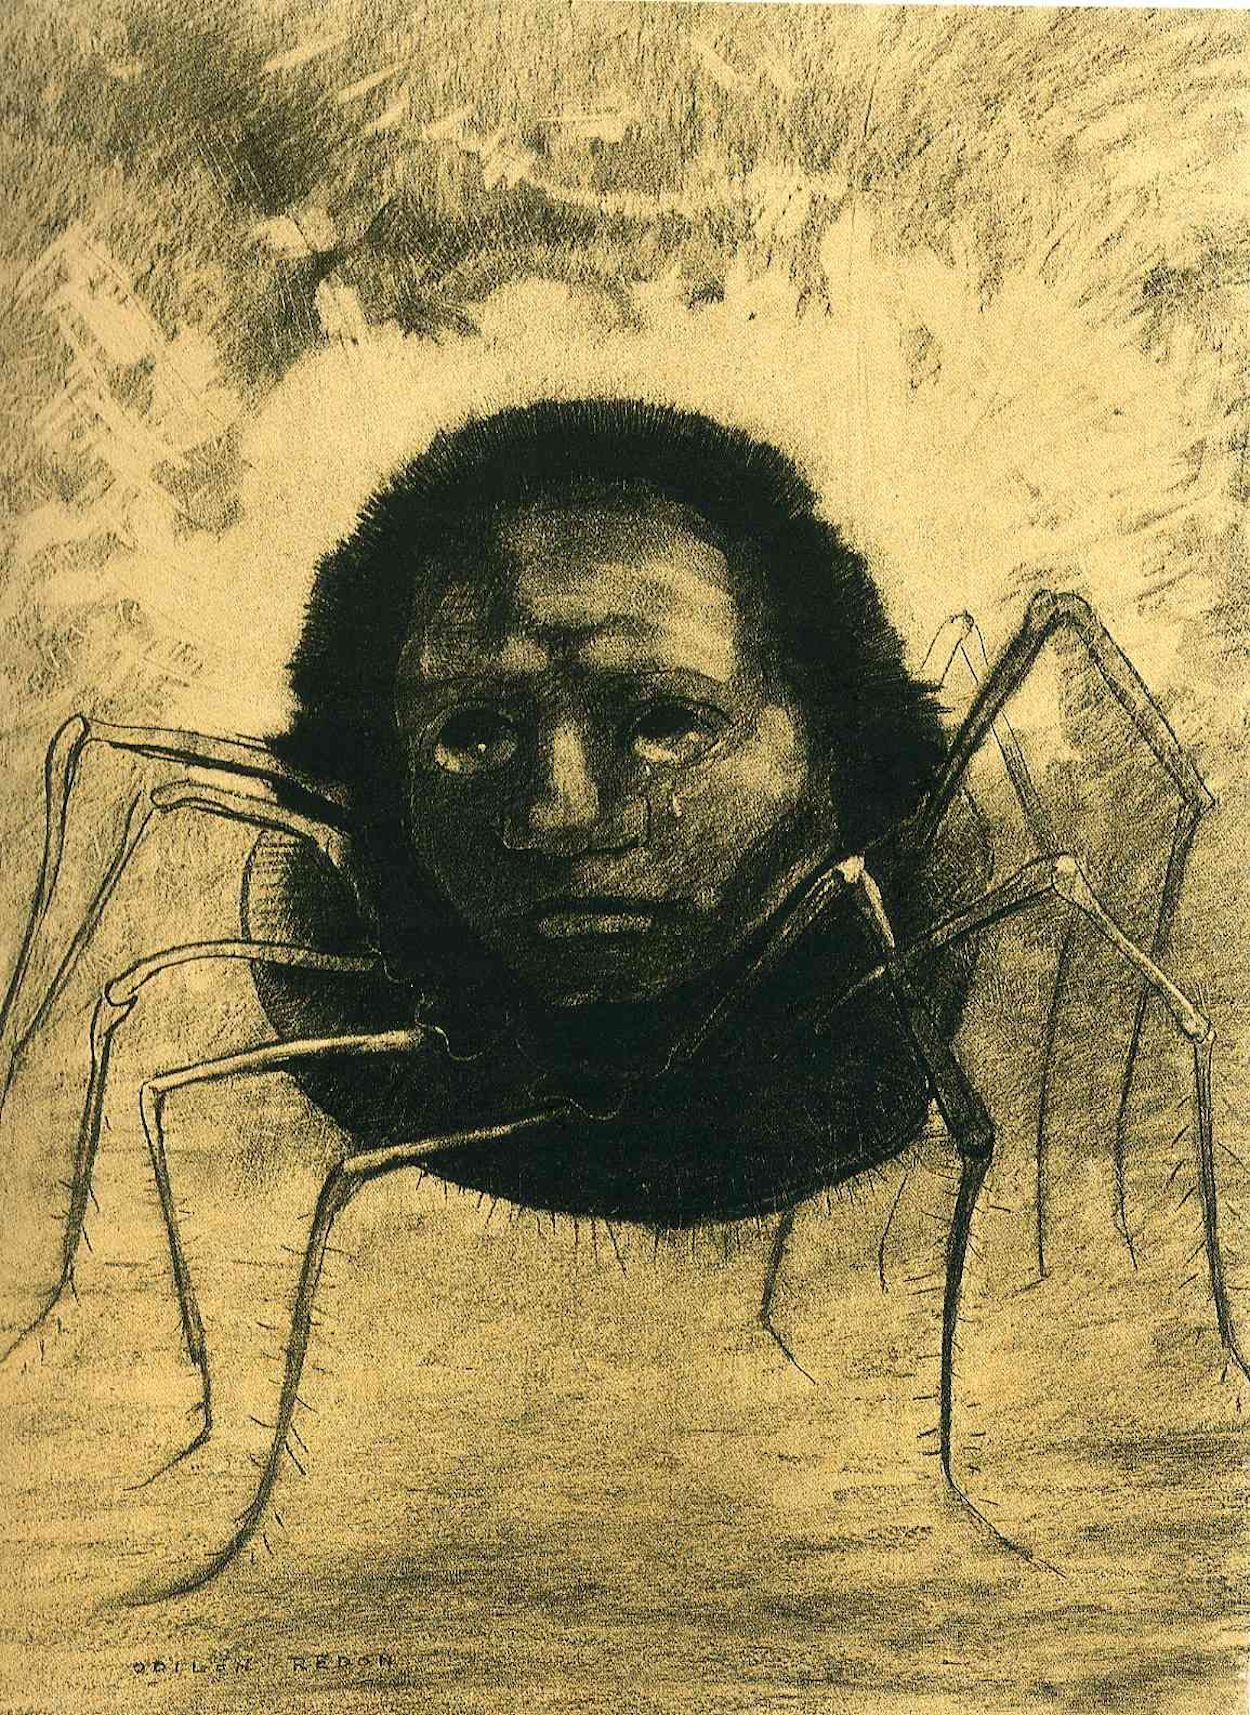 The Crying Spider by Odilon Redon - 1881 - 49 x 32.5 cm private collection